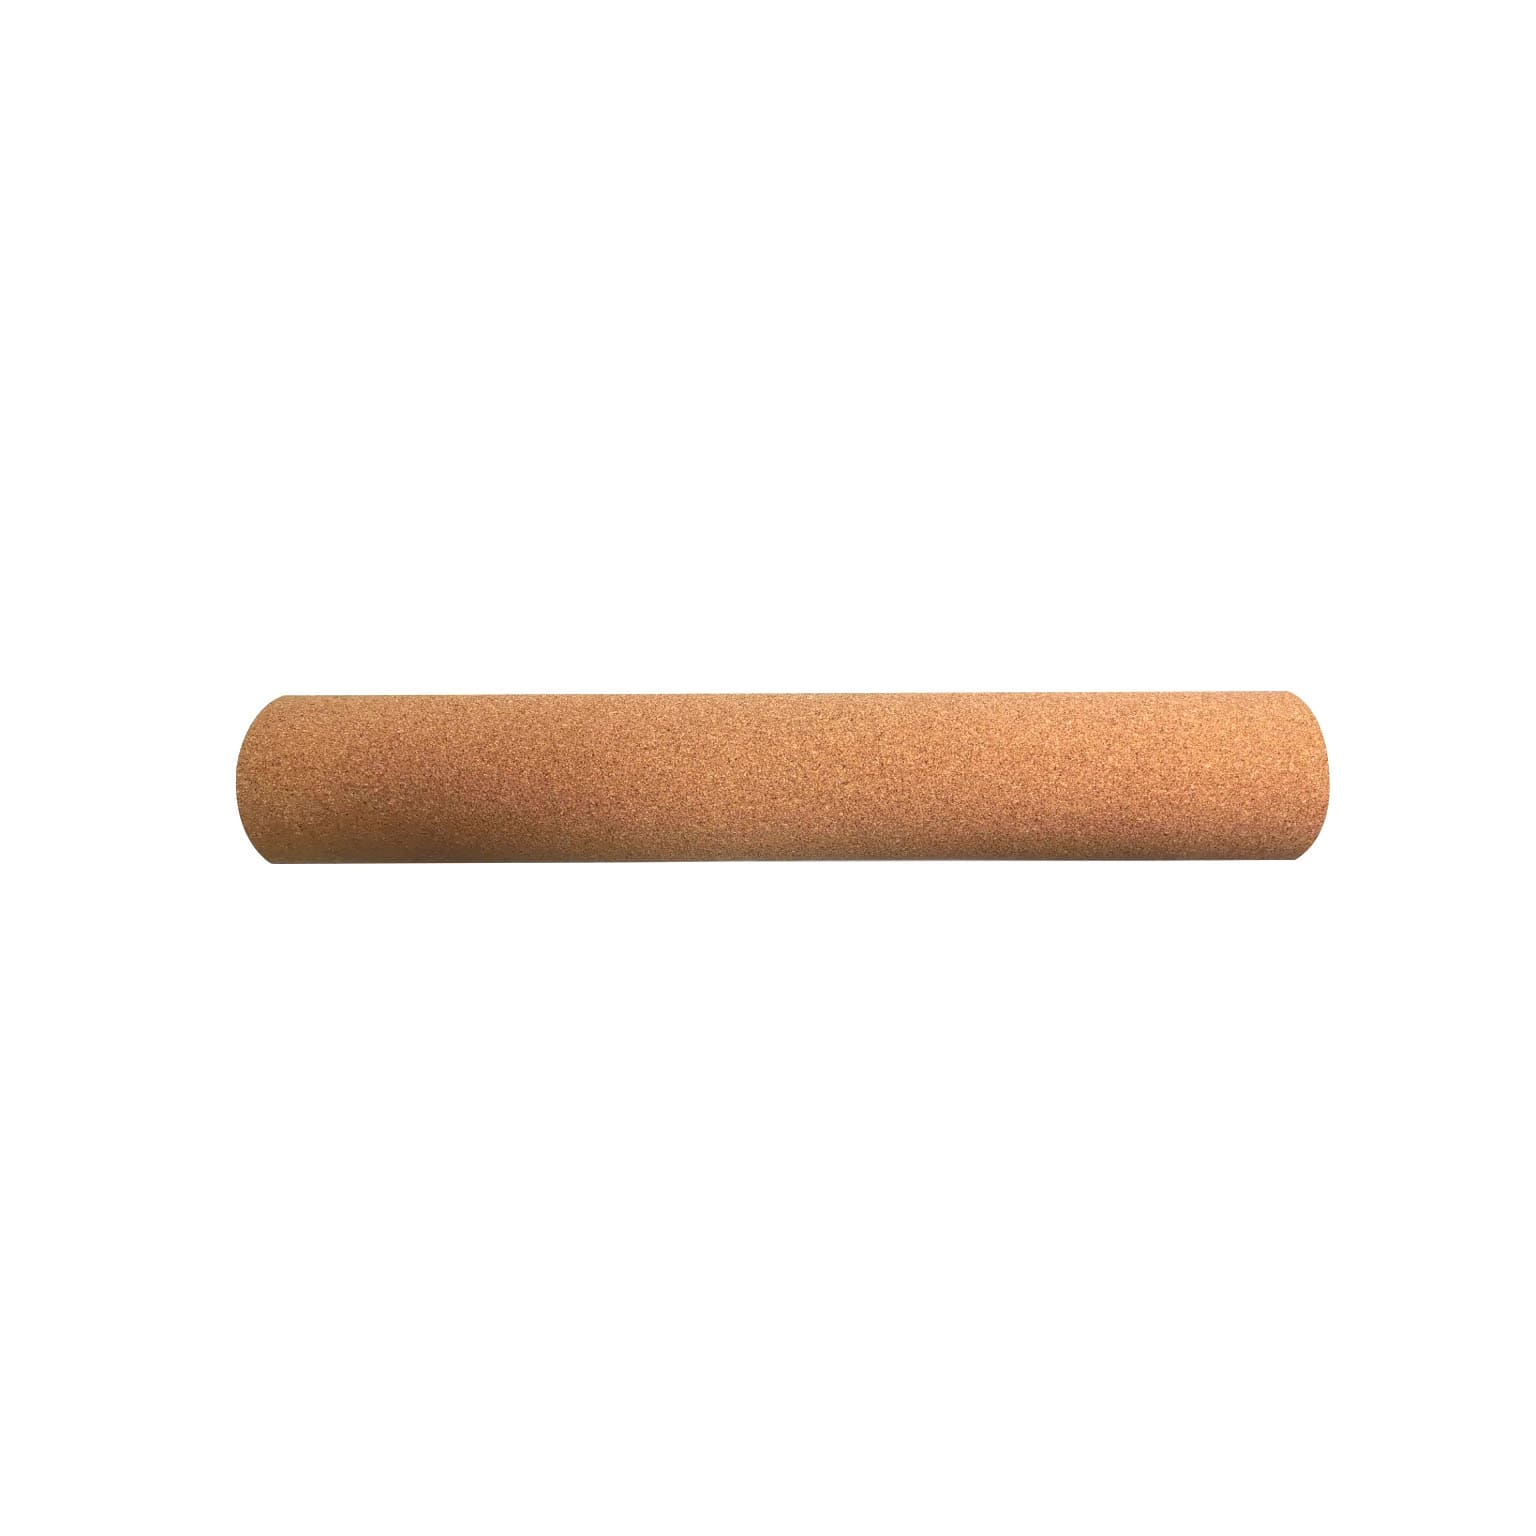 Marsh School Office Project Hobby Craft Work 48X576 1/8 Natural Cork Roll for